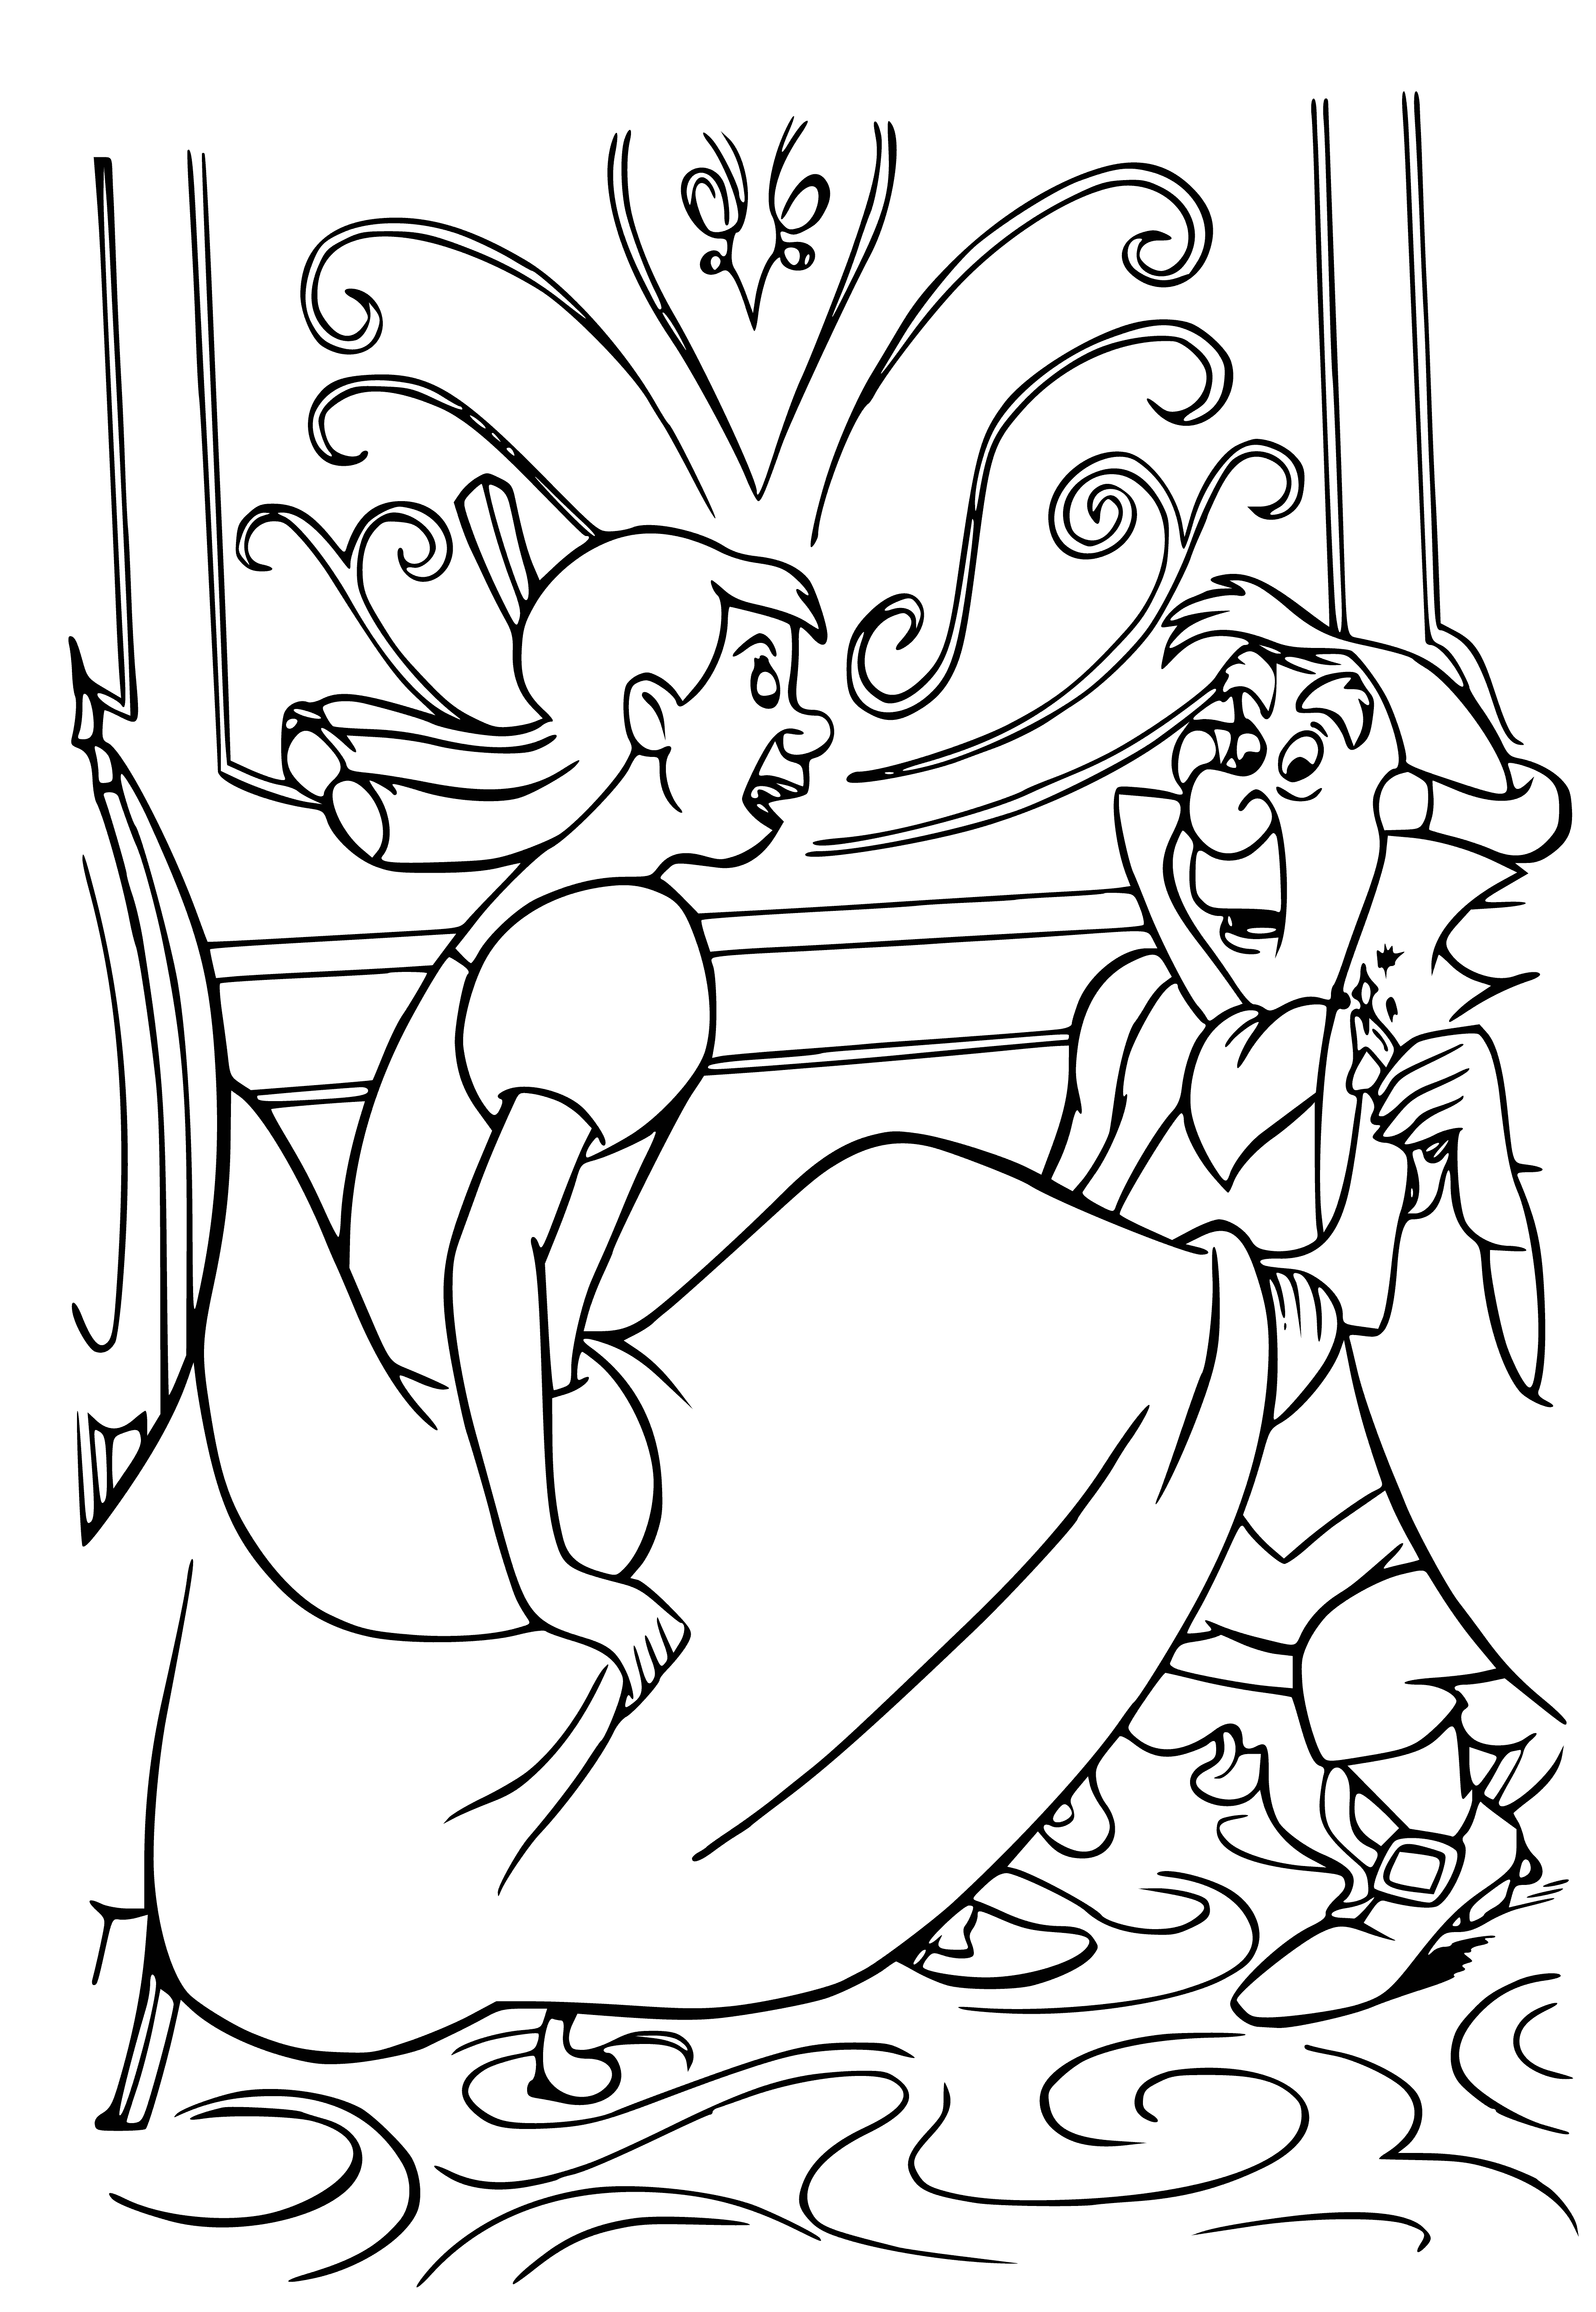 coloring page: Sisters measure slipper with ruler; one holds slipper, other holds ruler's end, both look at slipper.